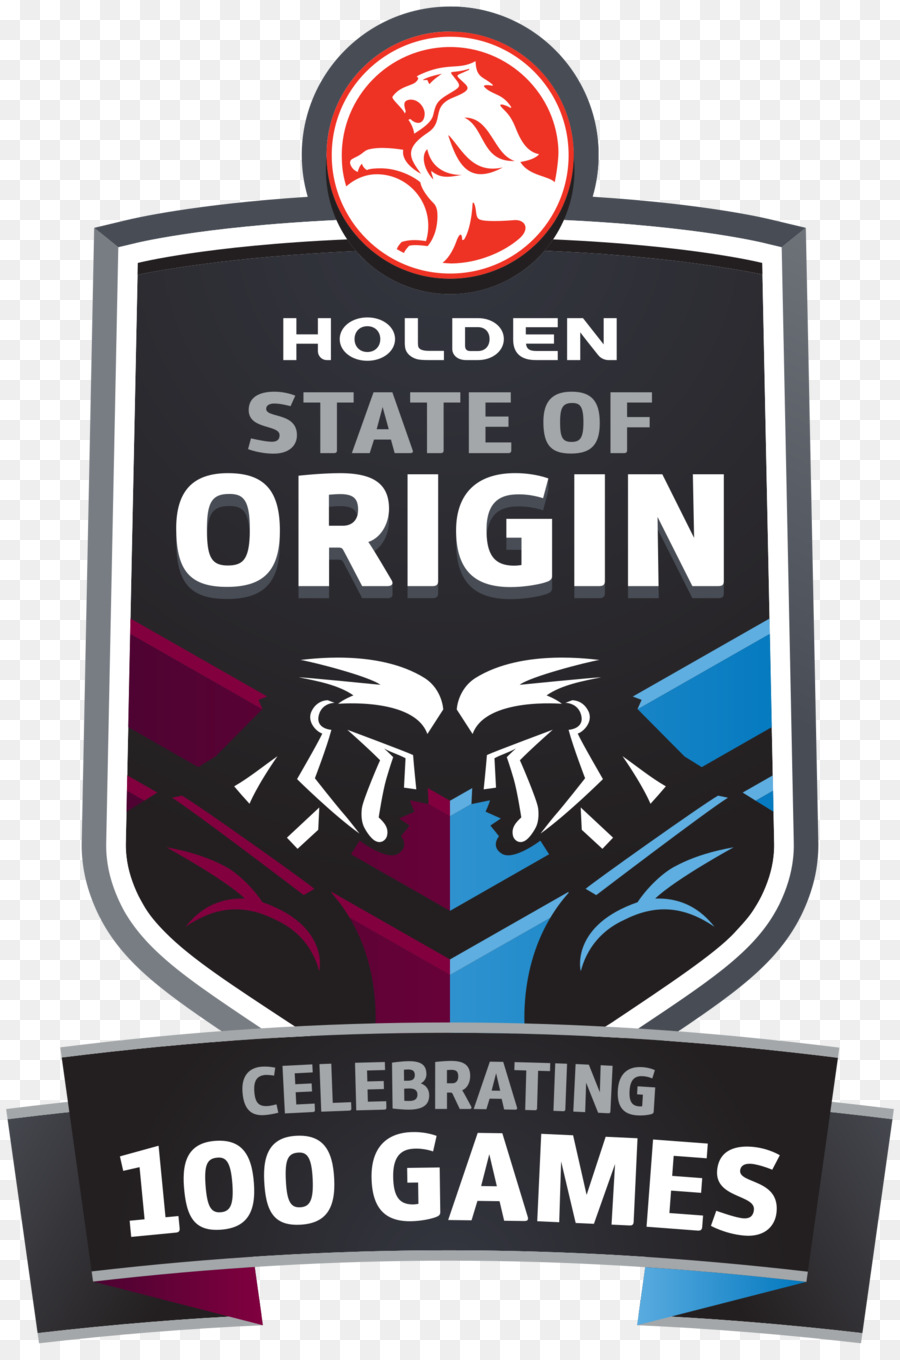 2016 State of Origin Serie 2017 State of Origin Serie Queensland rugby league team, National Rugby League State of Origin Series - Game 1 in Melbourne - Graduierung Saison poster